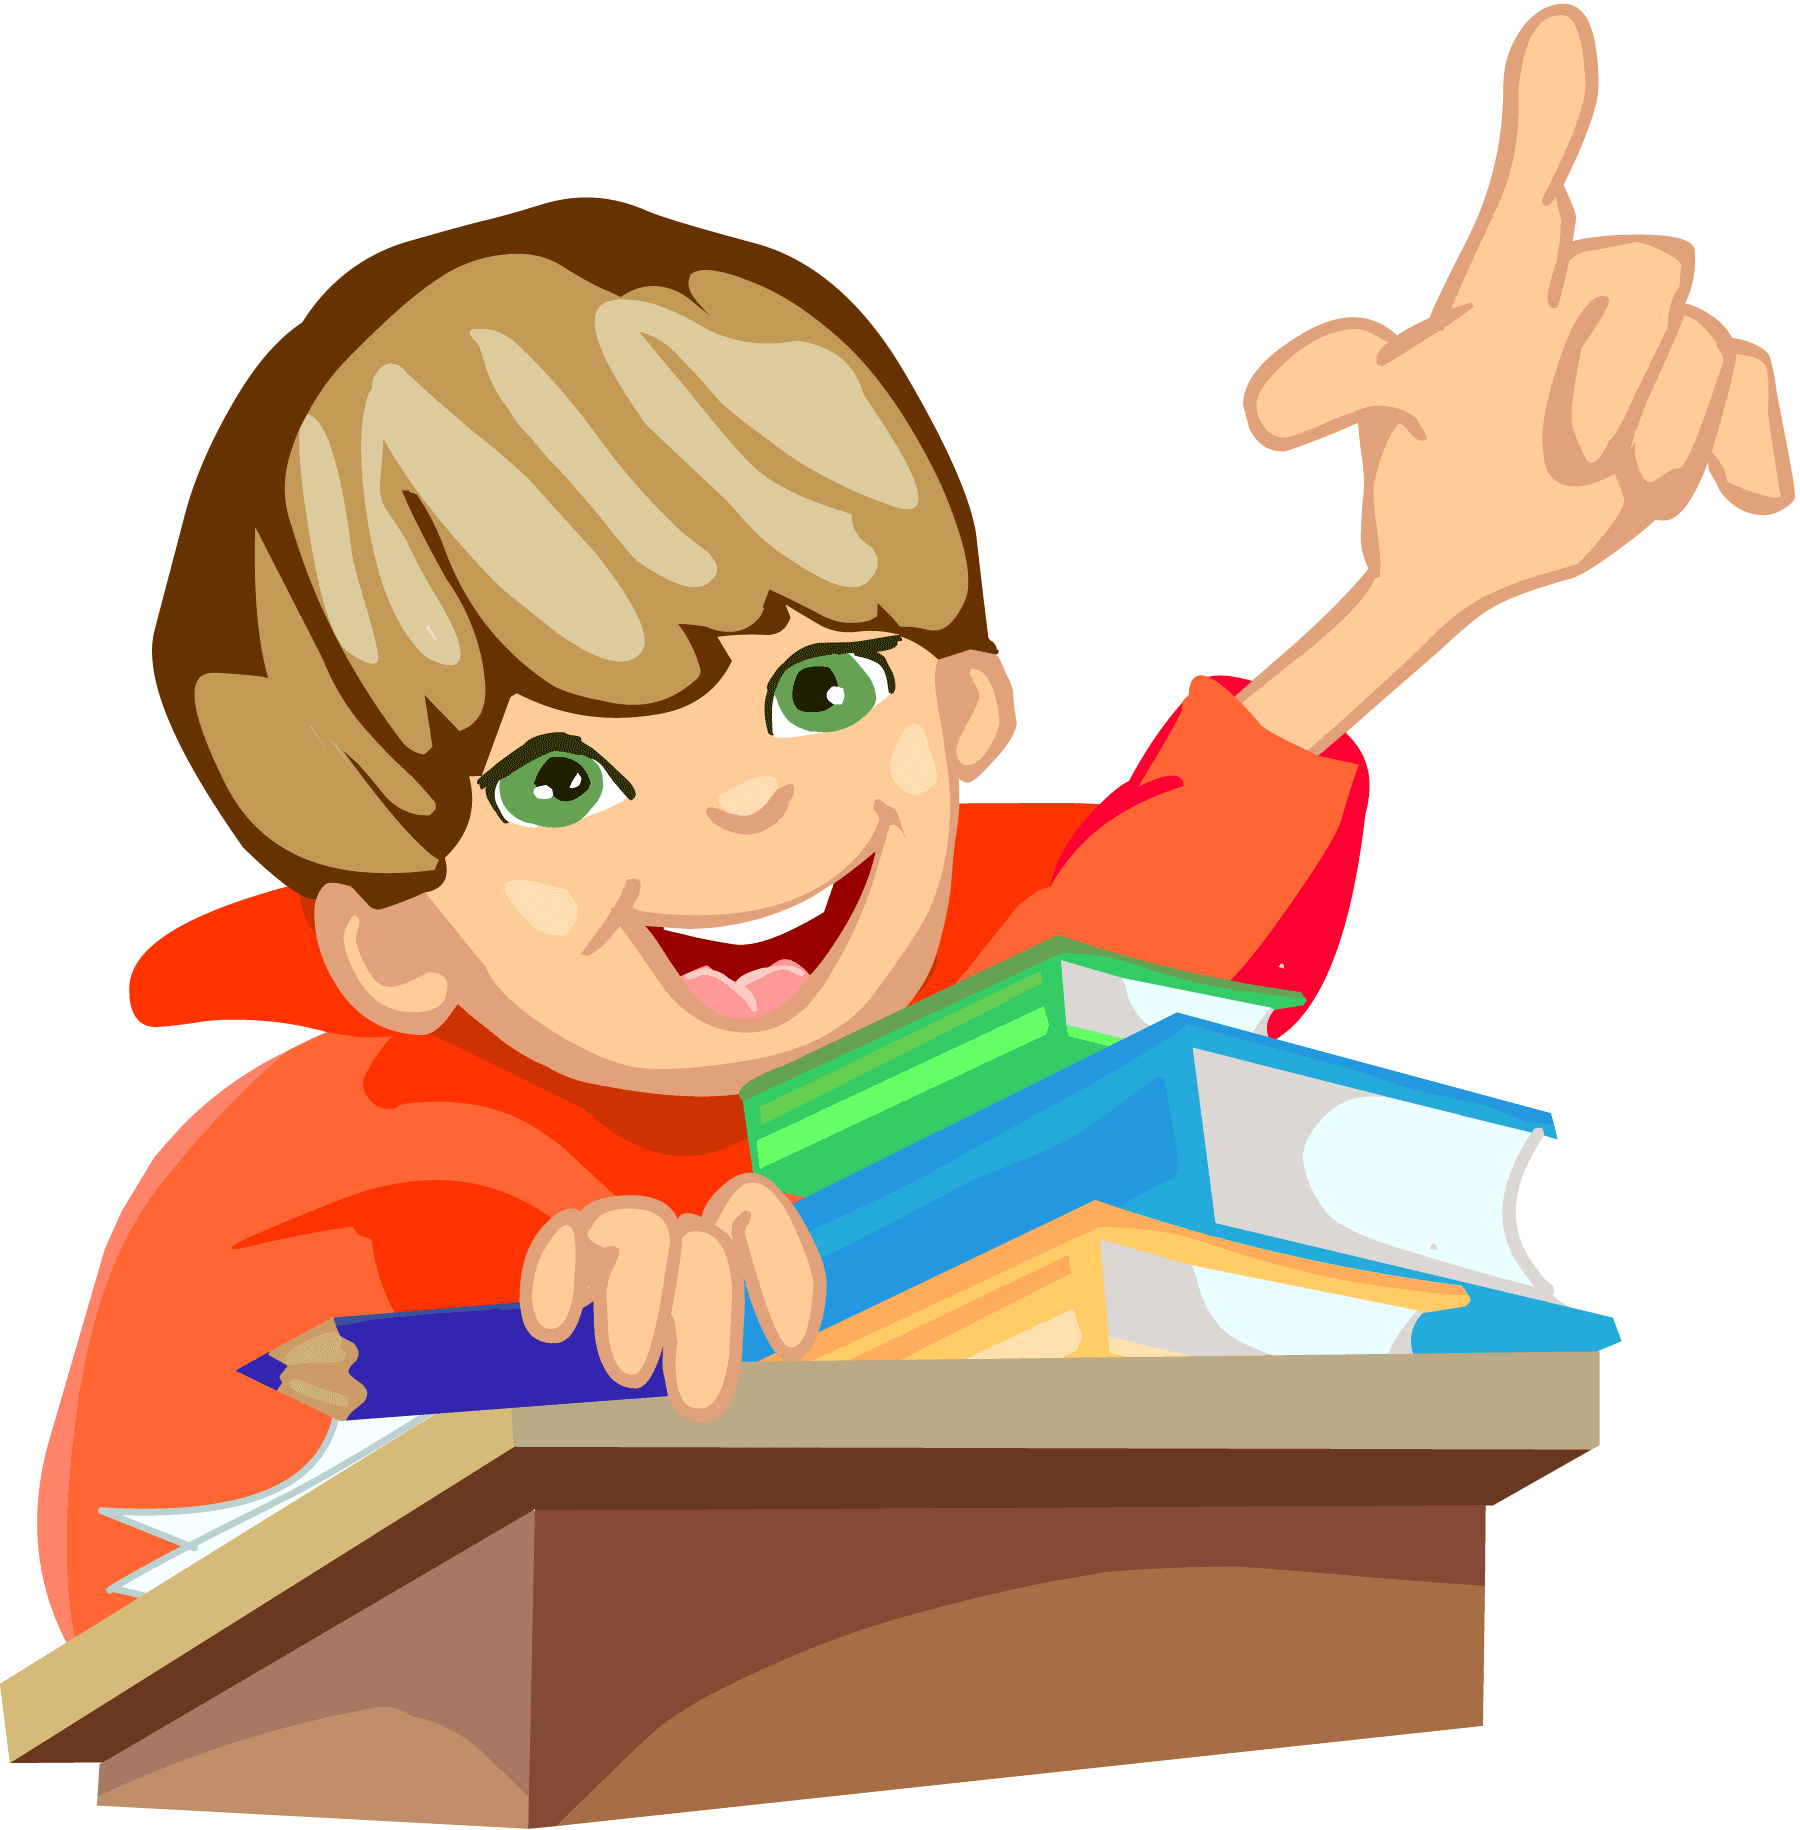 Students In A Classroom Clipart